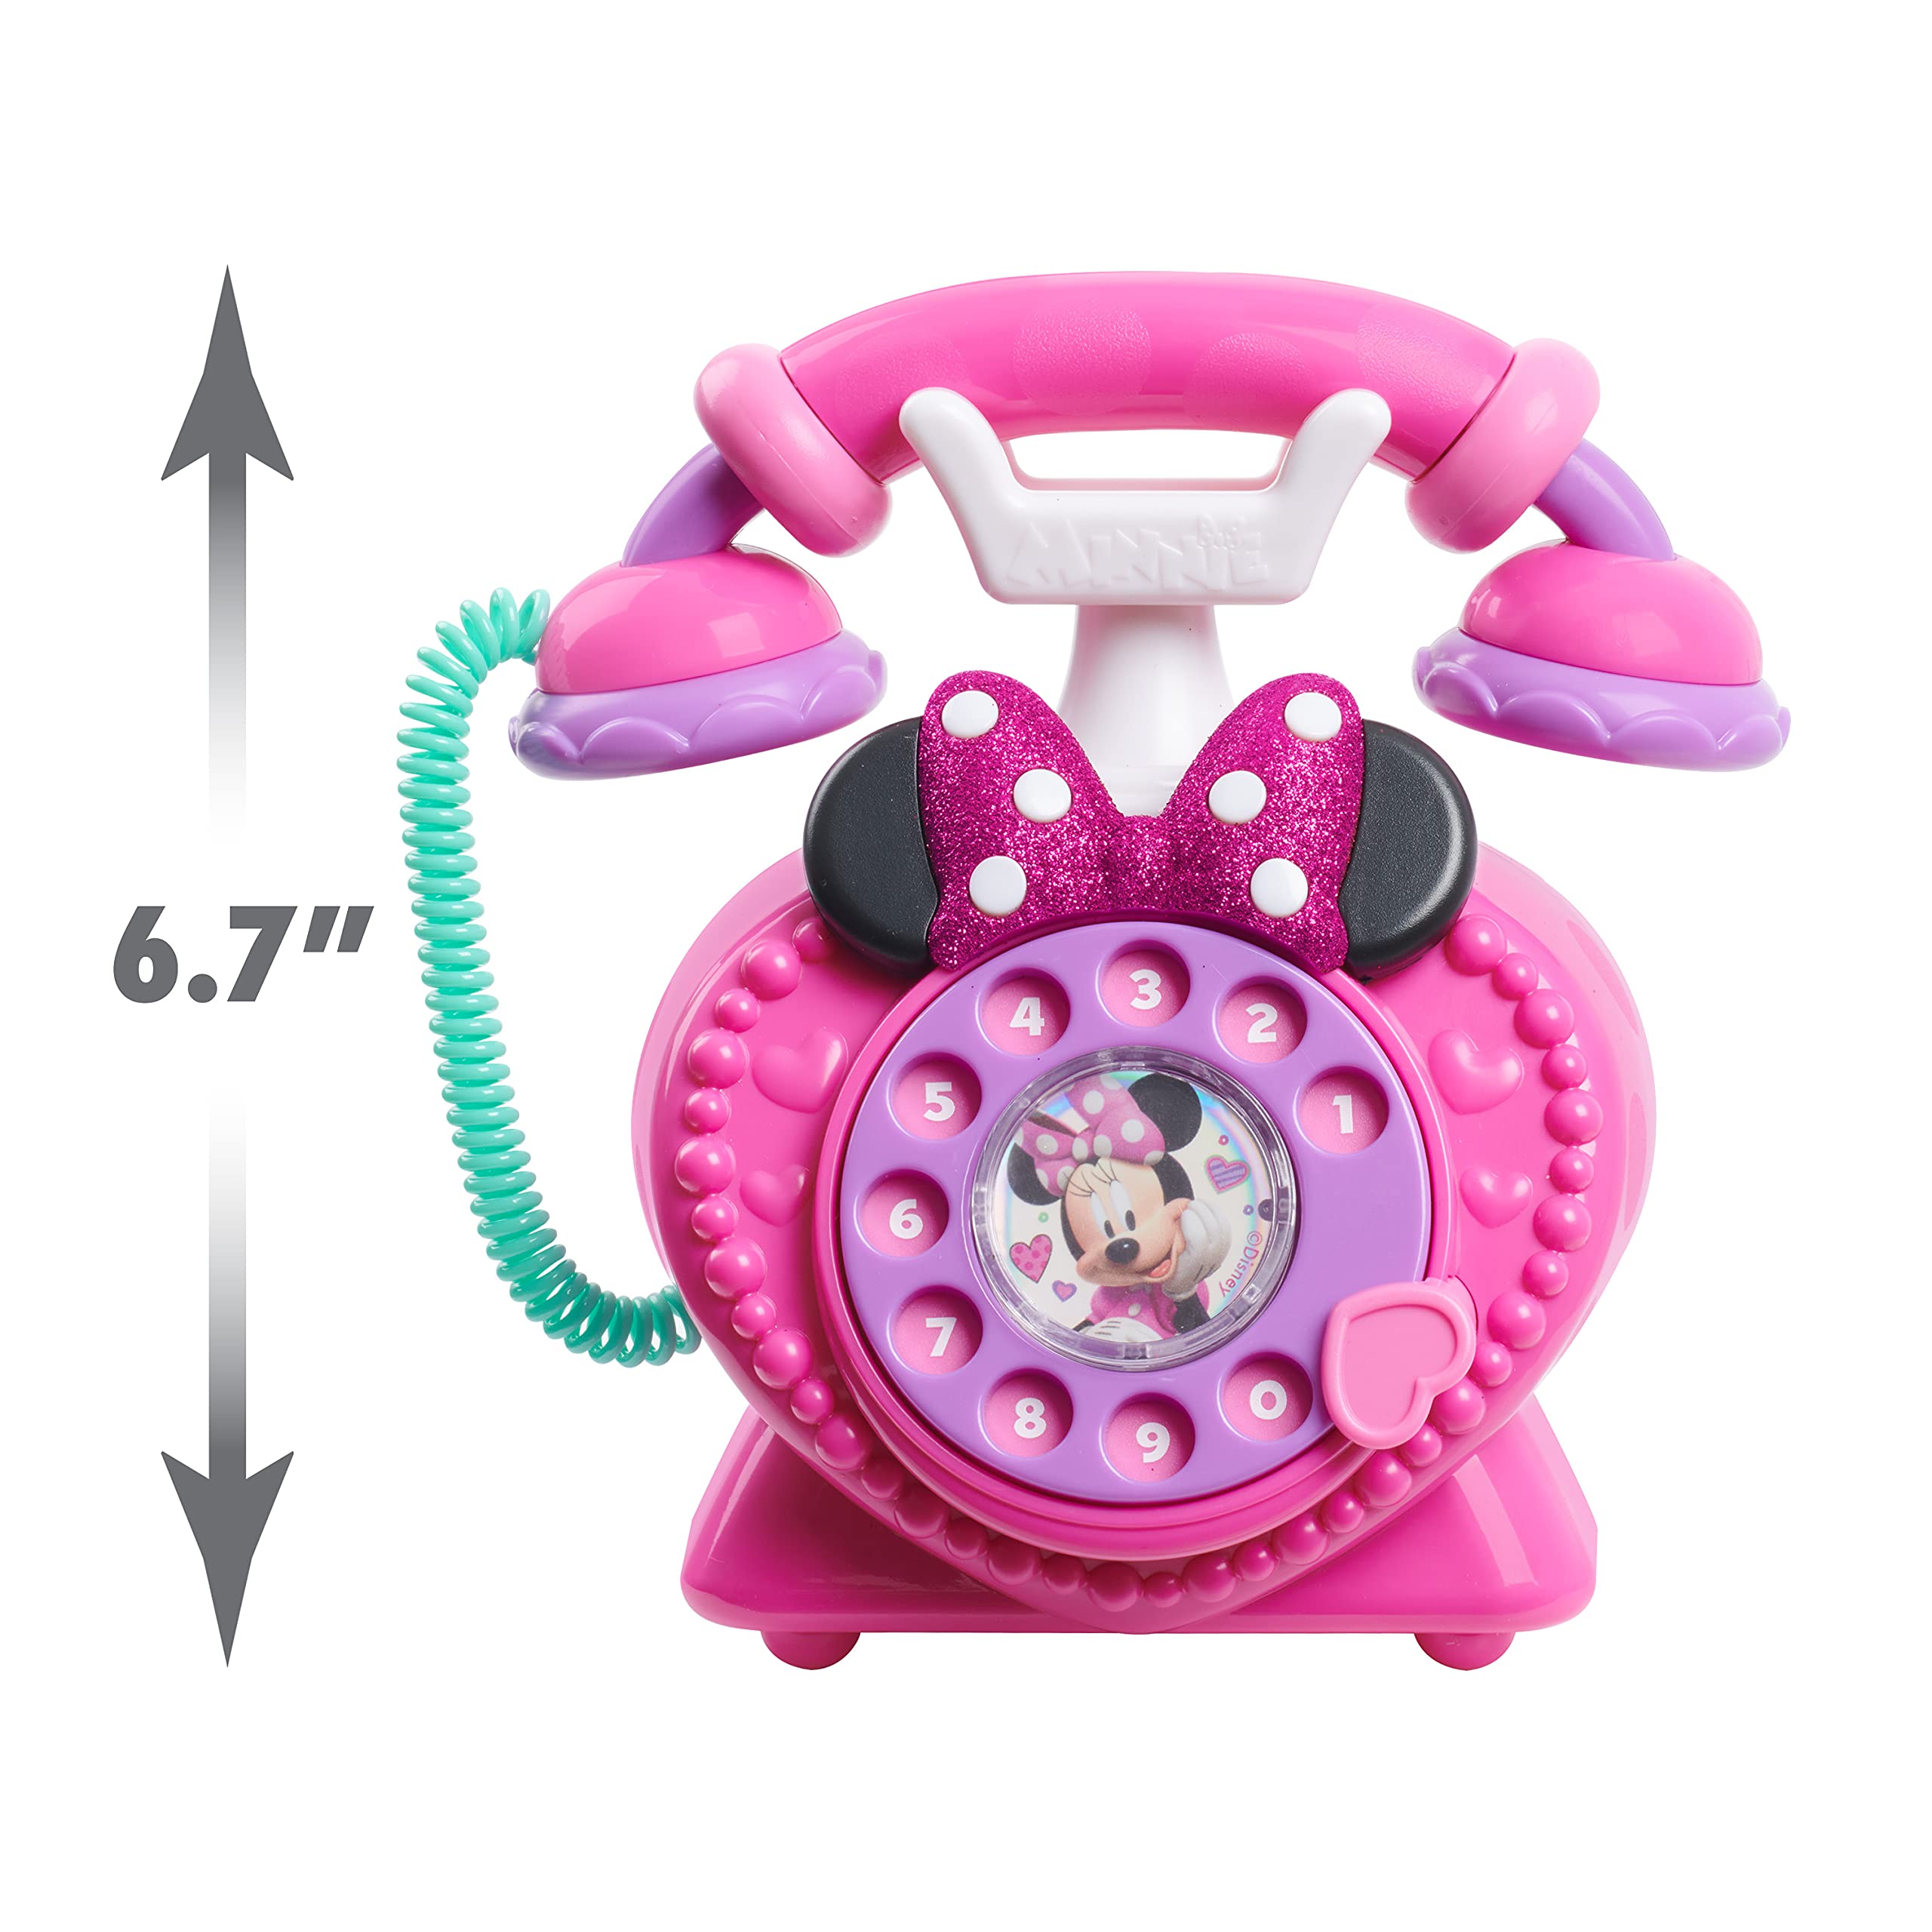 Disney Junior Minnie Mouse Ring Me Rotary Pretend Play Phone, Lights and Sounds, Officially Licensed Kids Toys for Ages 3 Up, Gifts and Presents by Just Play